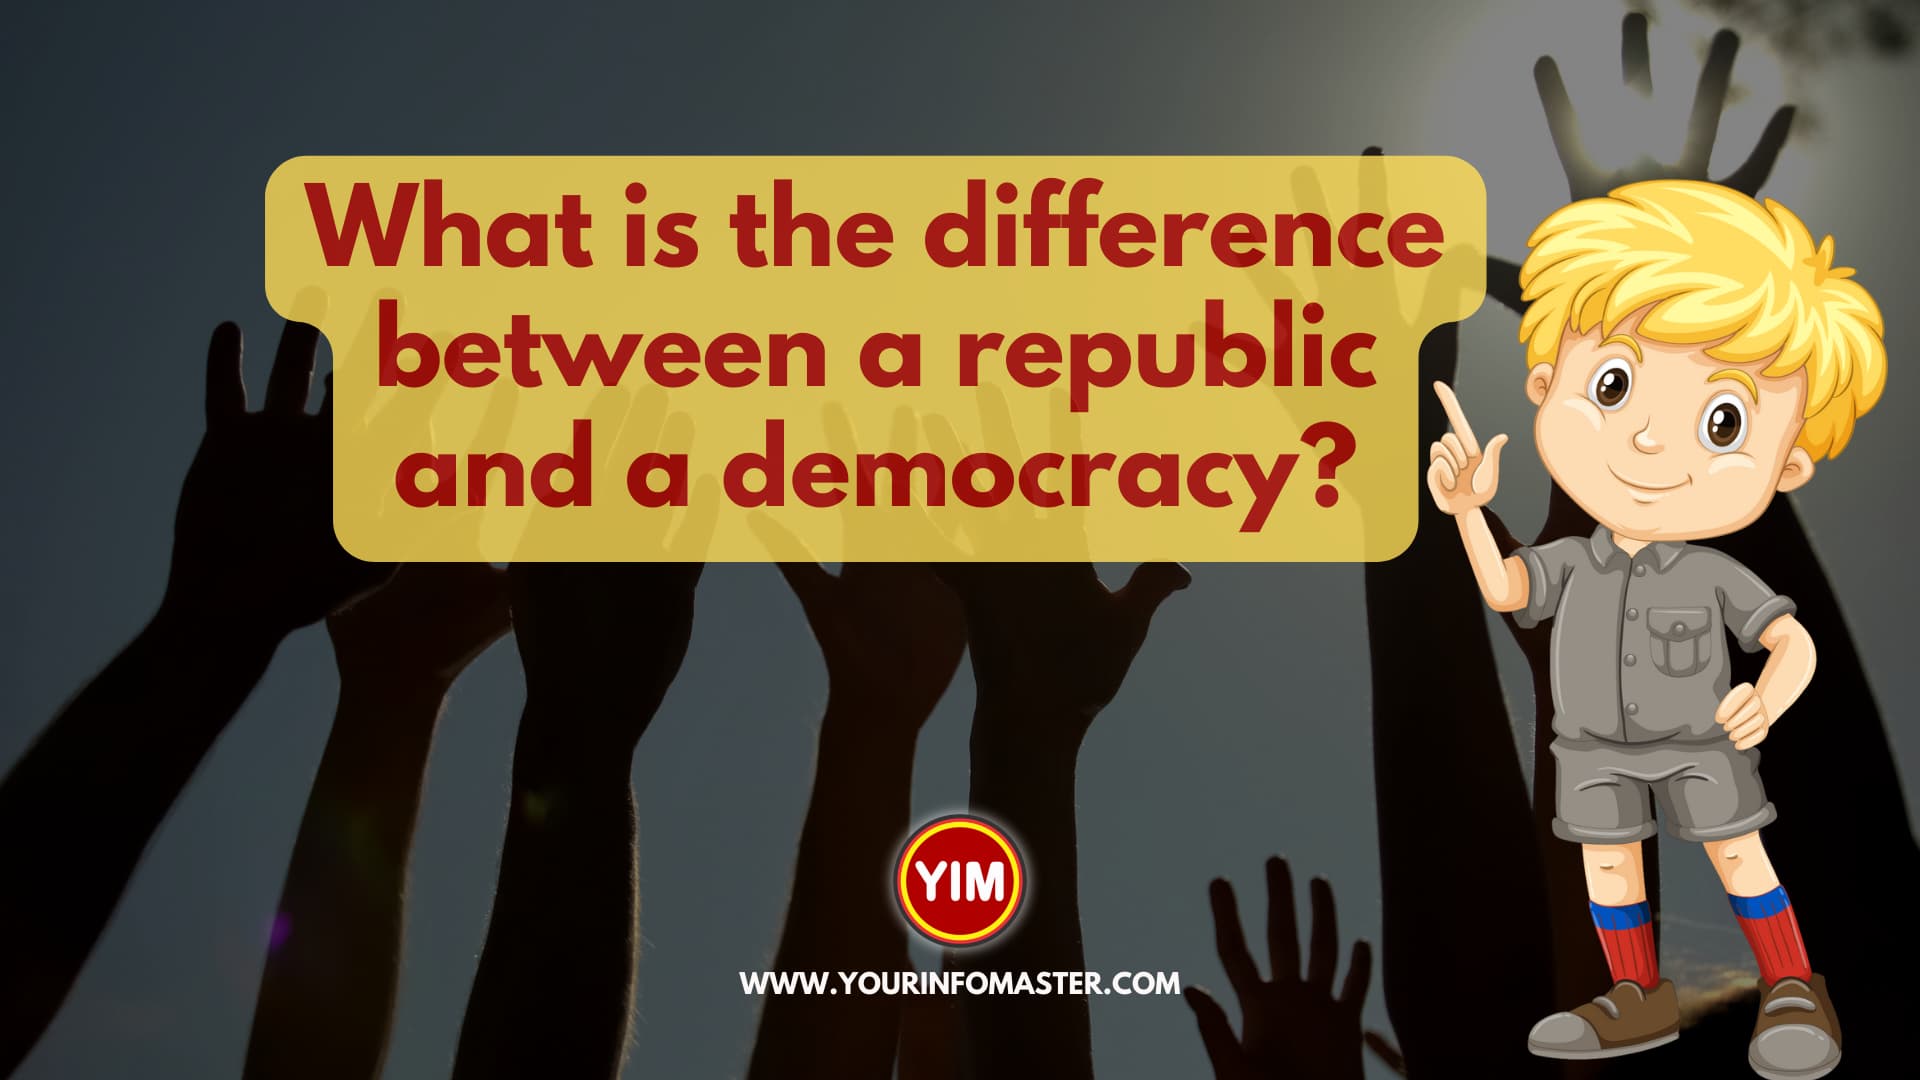 What is the difference between a republic and a democracy?